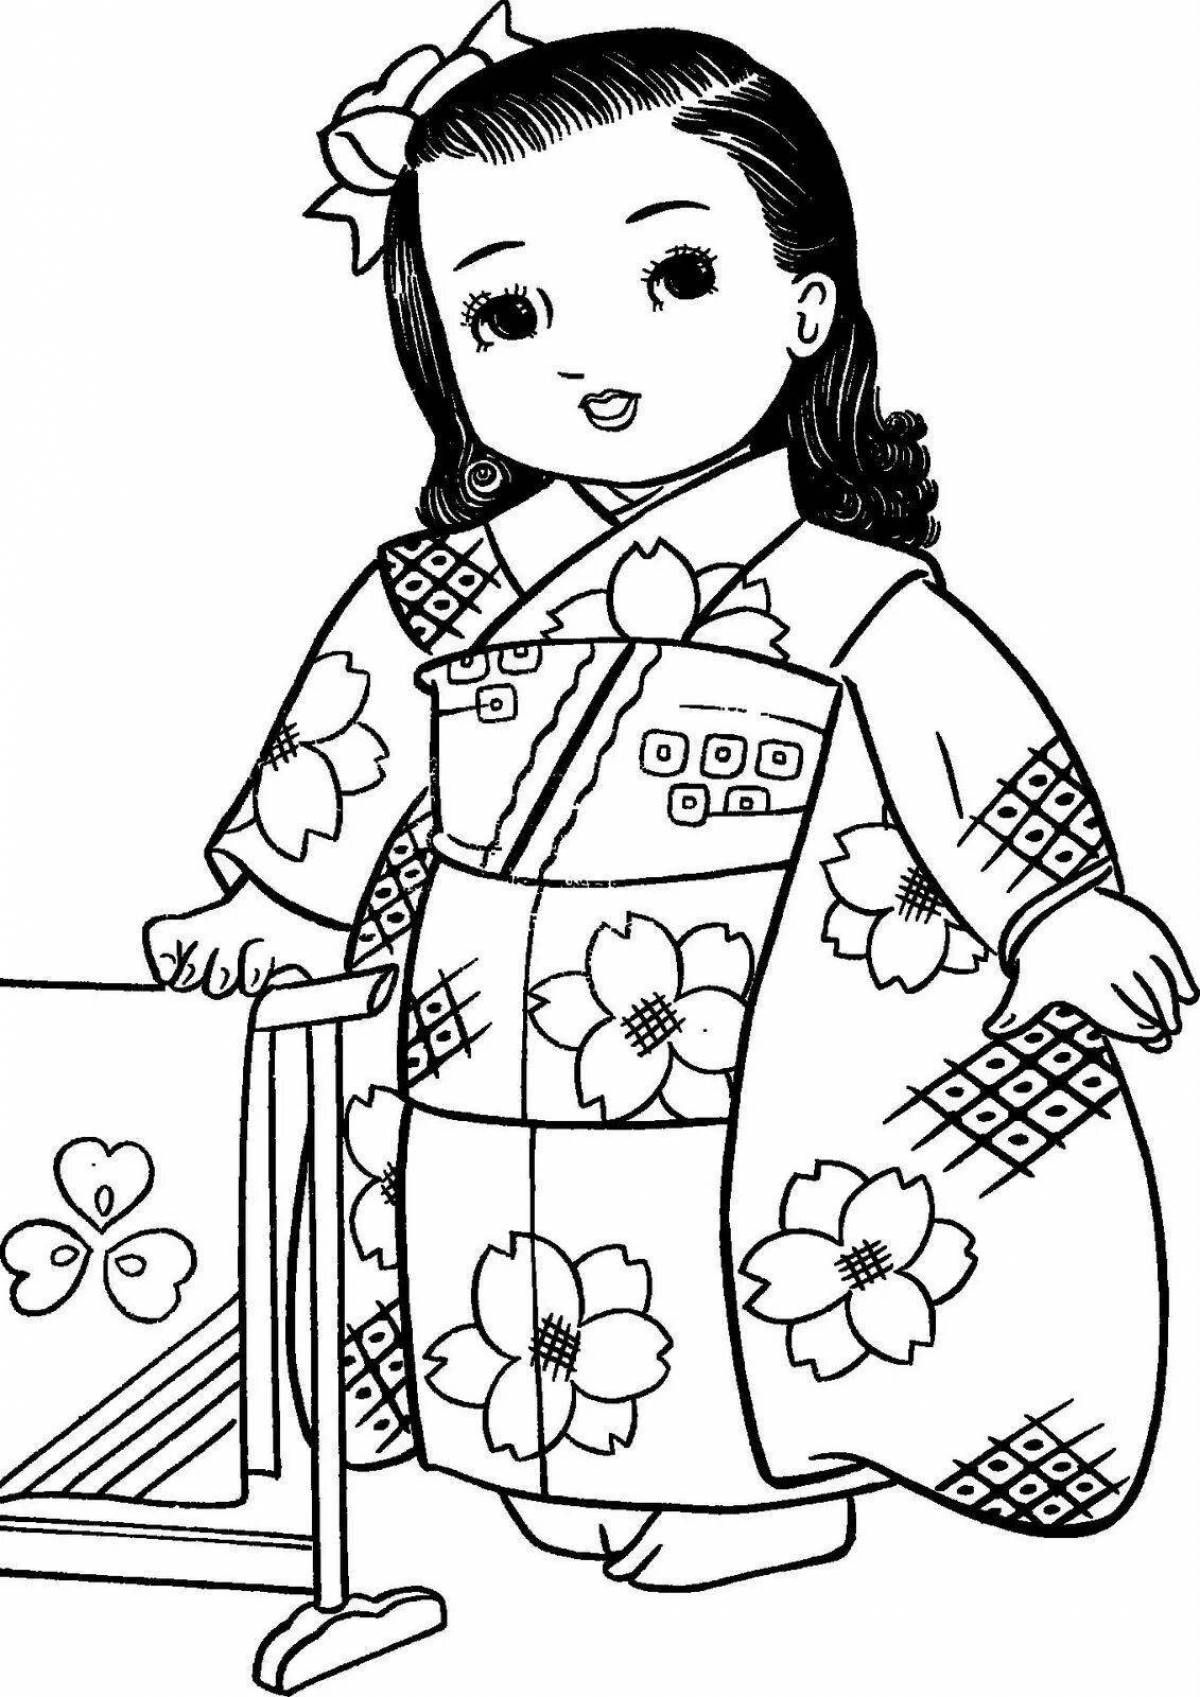 Shiny japan coloring book for kids